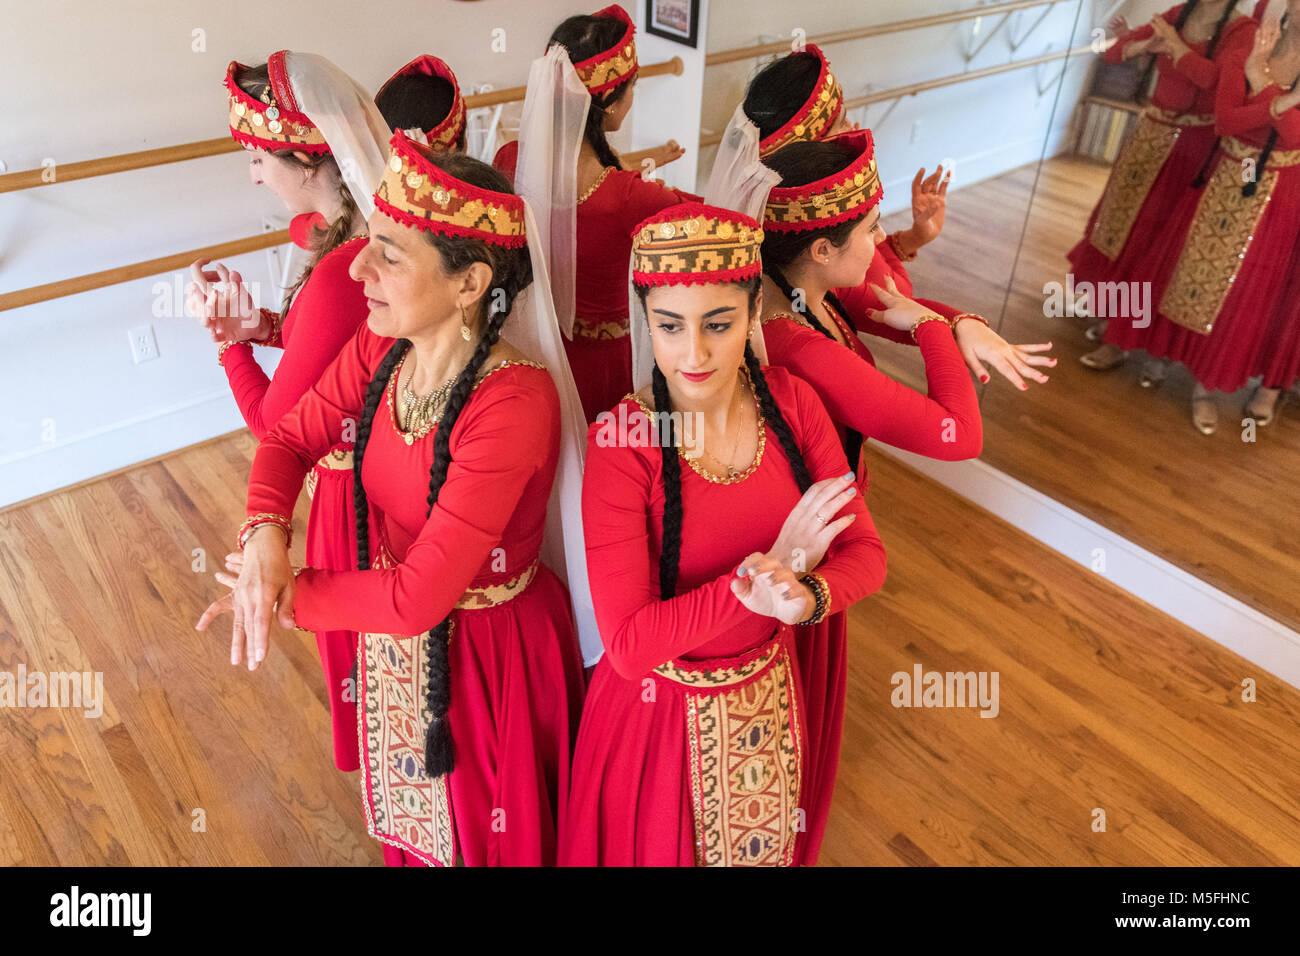 Group of female Armenian dancers coming together in a huddle in dance studio, Washington Grove, Maryland. Stock Photo